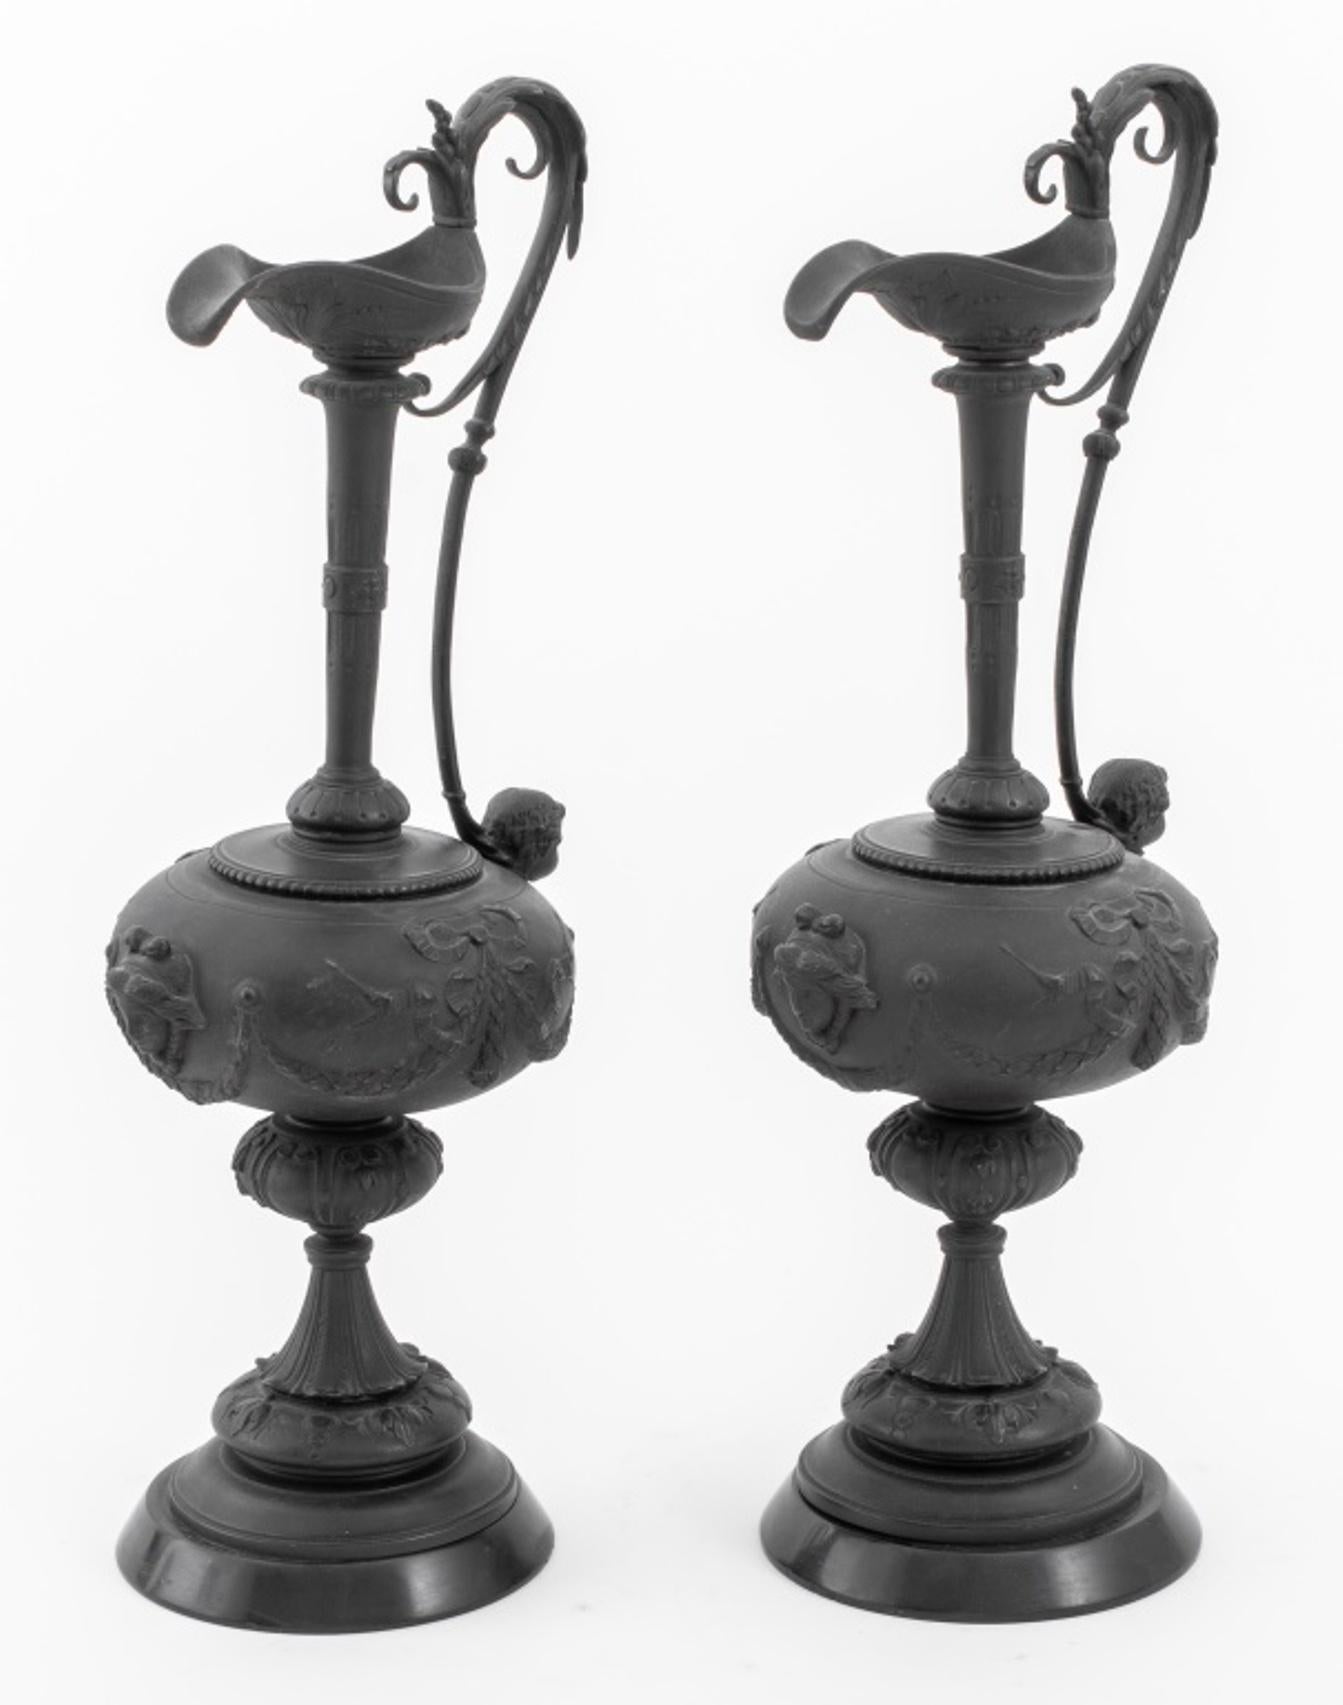 Pair of patinated bronze ewer form sculptures cast with Neoclassical manner decoration of foliate accents, bows, busts of putti below handles, and masques to front, mounted upon black marble stone bases.

Dimensions: Each: 18.75